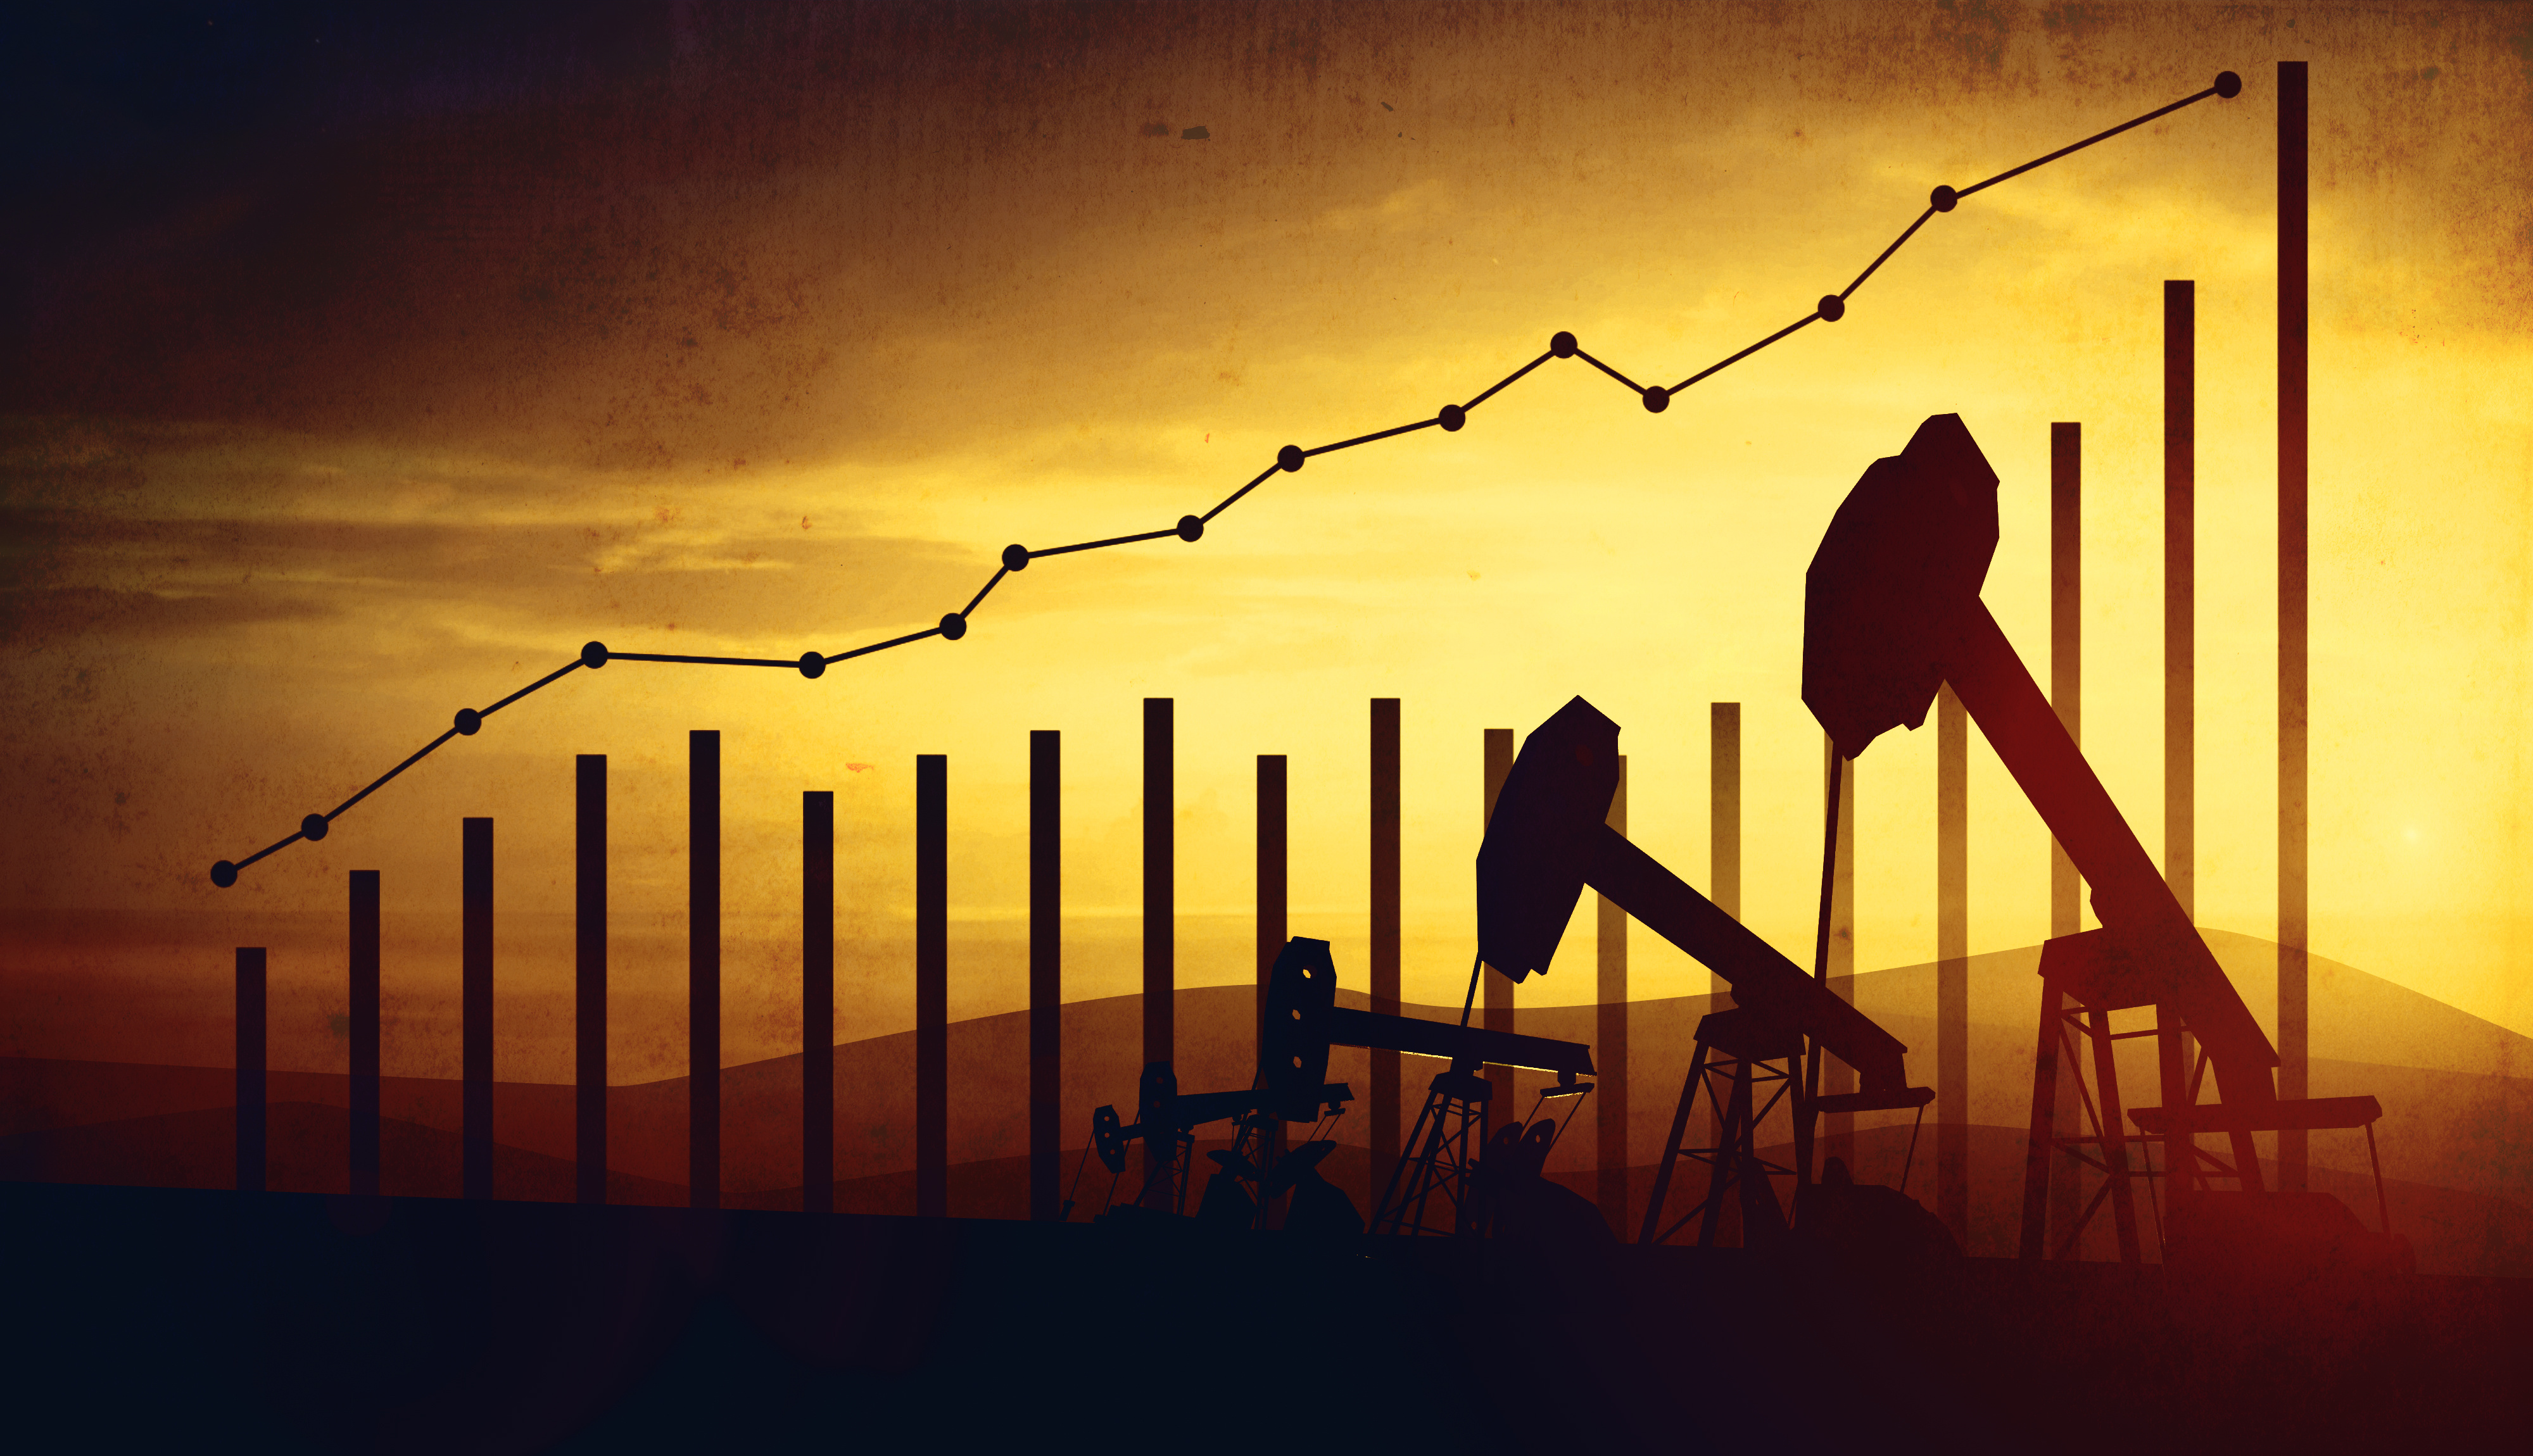 Image of oil derricks with upward trending bar and line graph representing oil prices increasing.